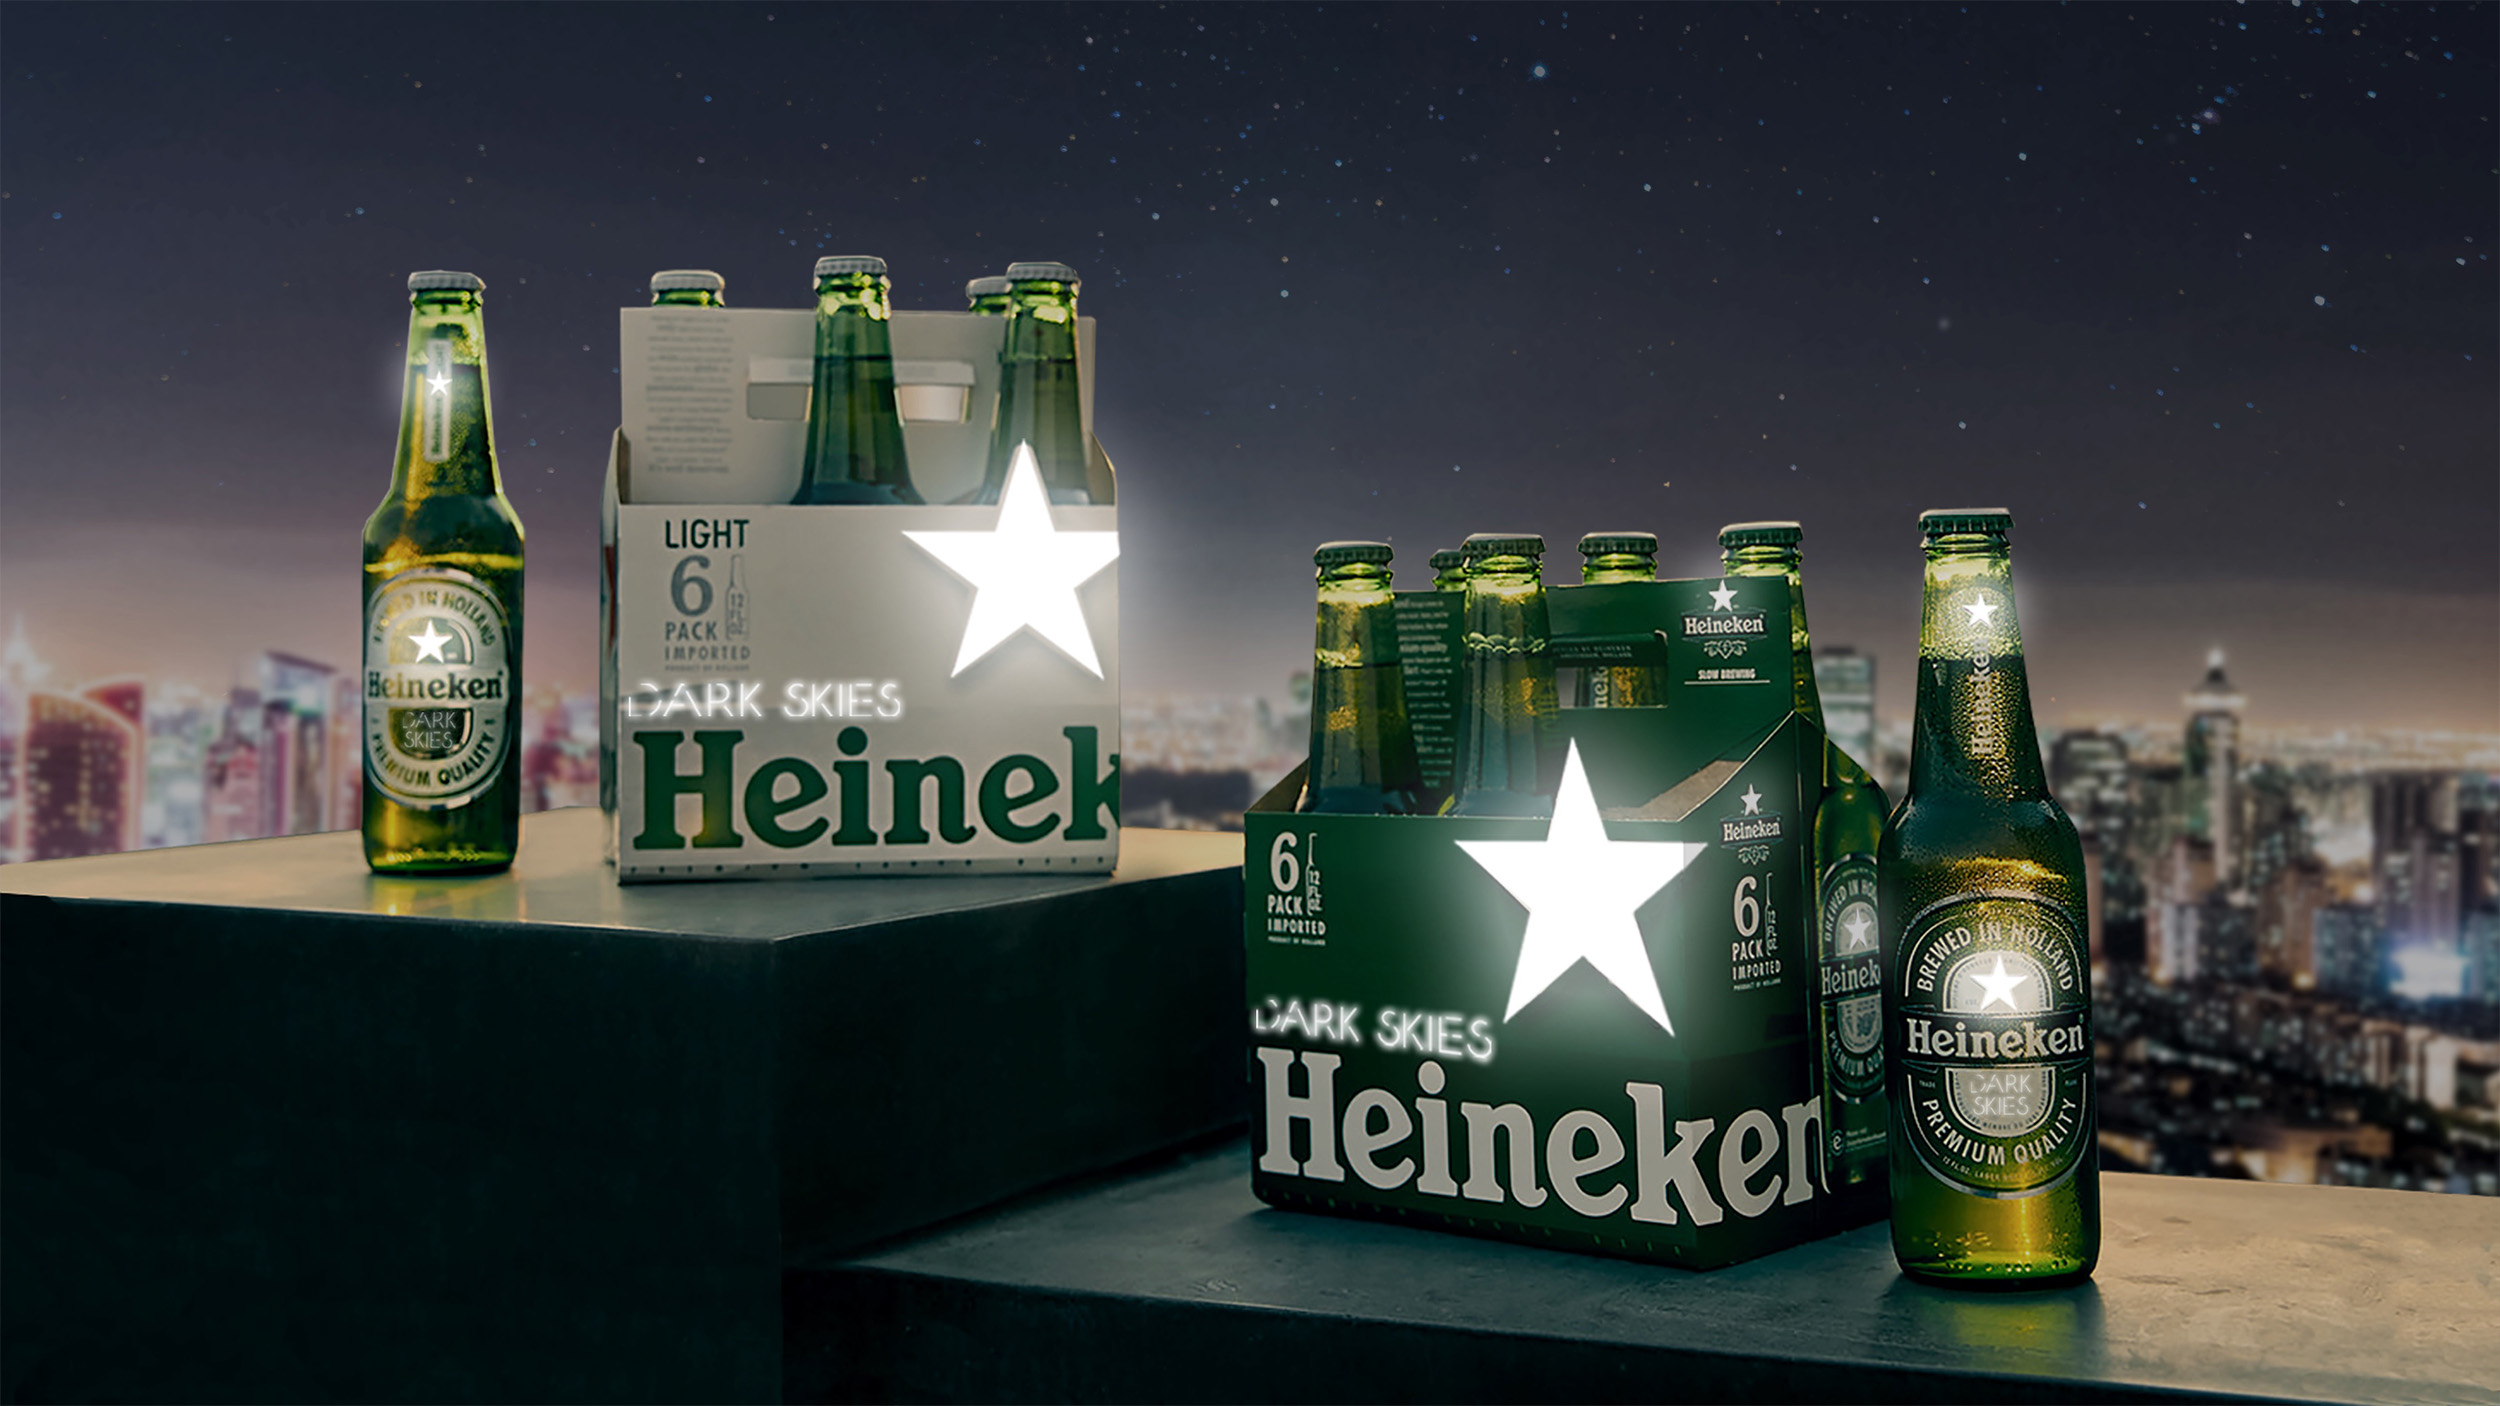 Heineken will conceal the star from their packaging, which will reveal in the dark. They will also black out billboards across the world, raising awareness of light pollution.